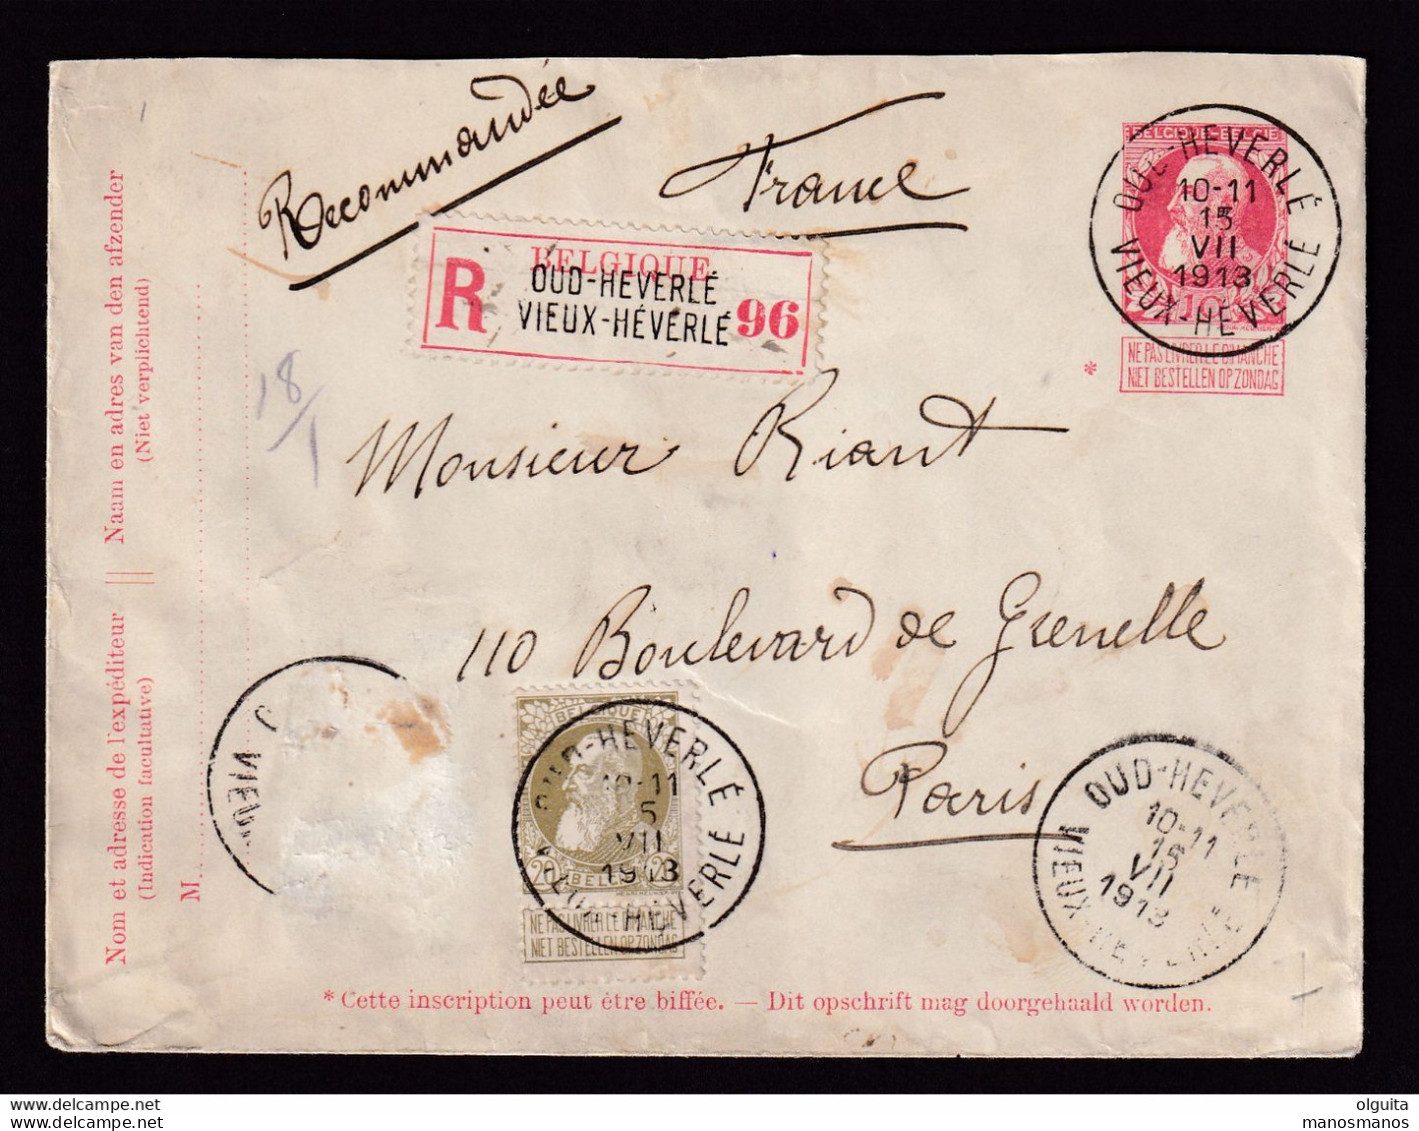 DDDD 182 -- Entier Enveloppe Grosse Barbe + TP Dito (1 Timbre Manque) Recommandée T4R OUD HEVERLEE 1912 - Enveloppes